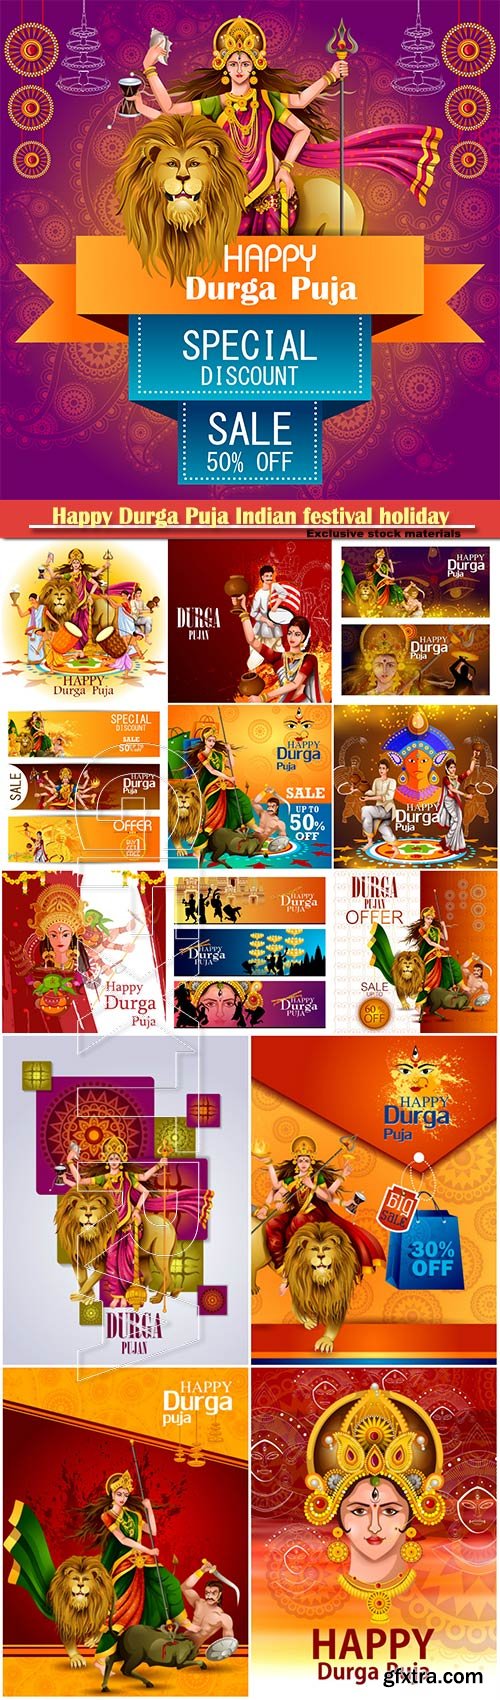 Happy Durga Puja Indian festival holiday vector background # 5